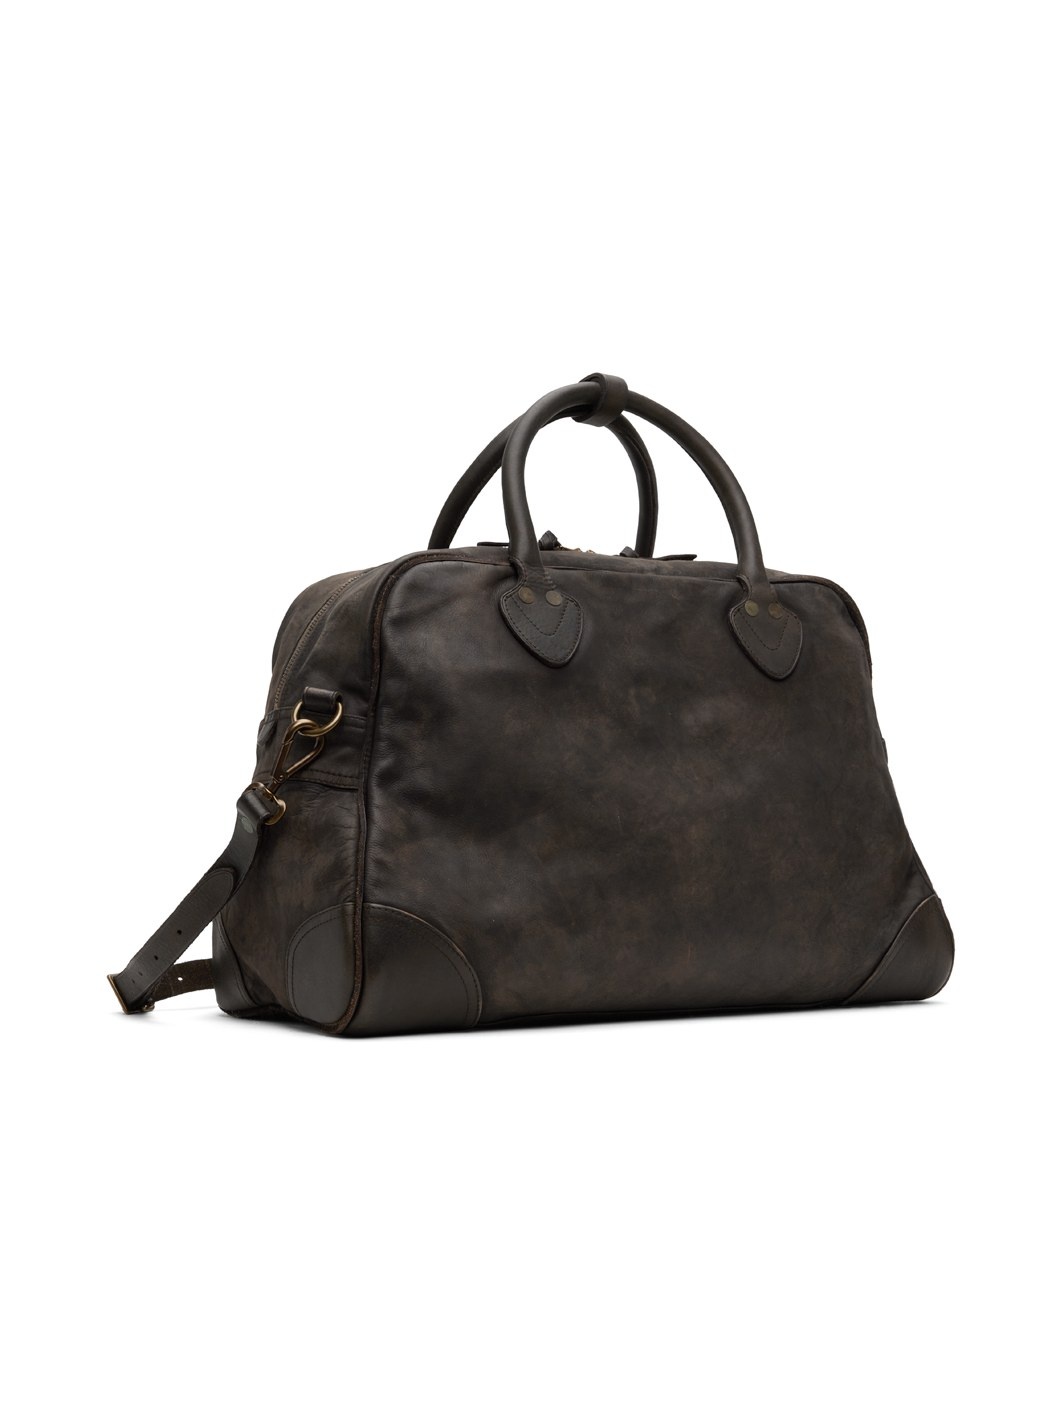 Brown Leather Duffle Bag - 3